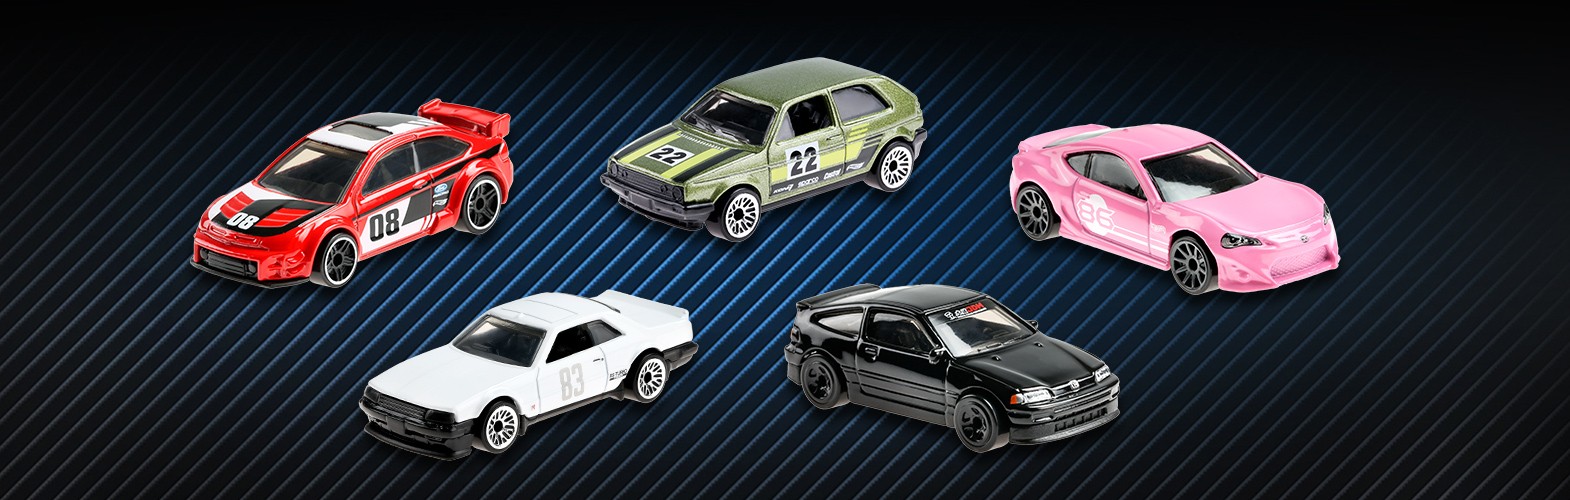 Themed Auto Mix 1 - CULT RACERS